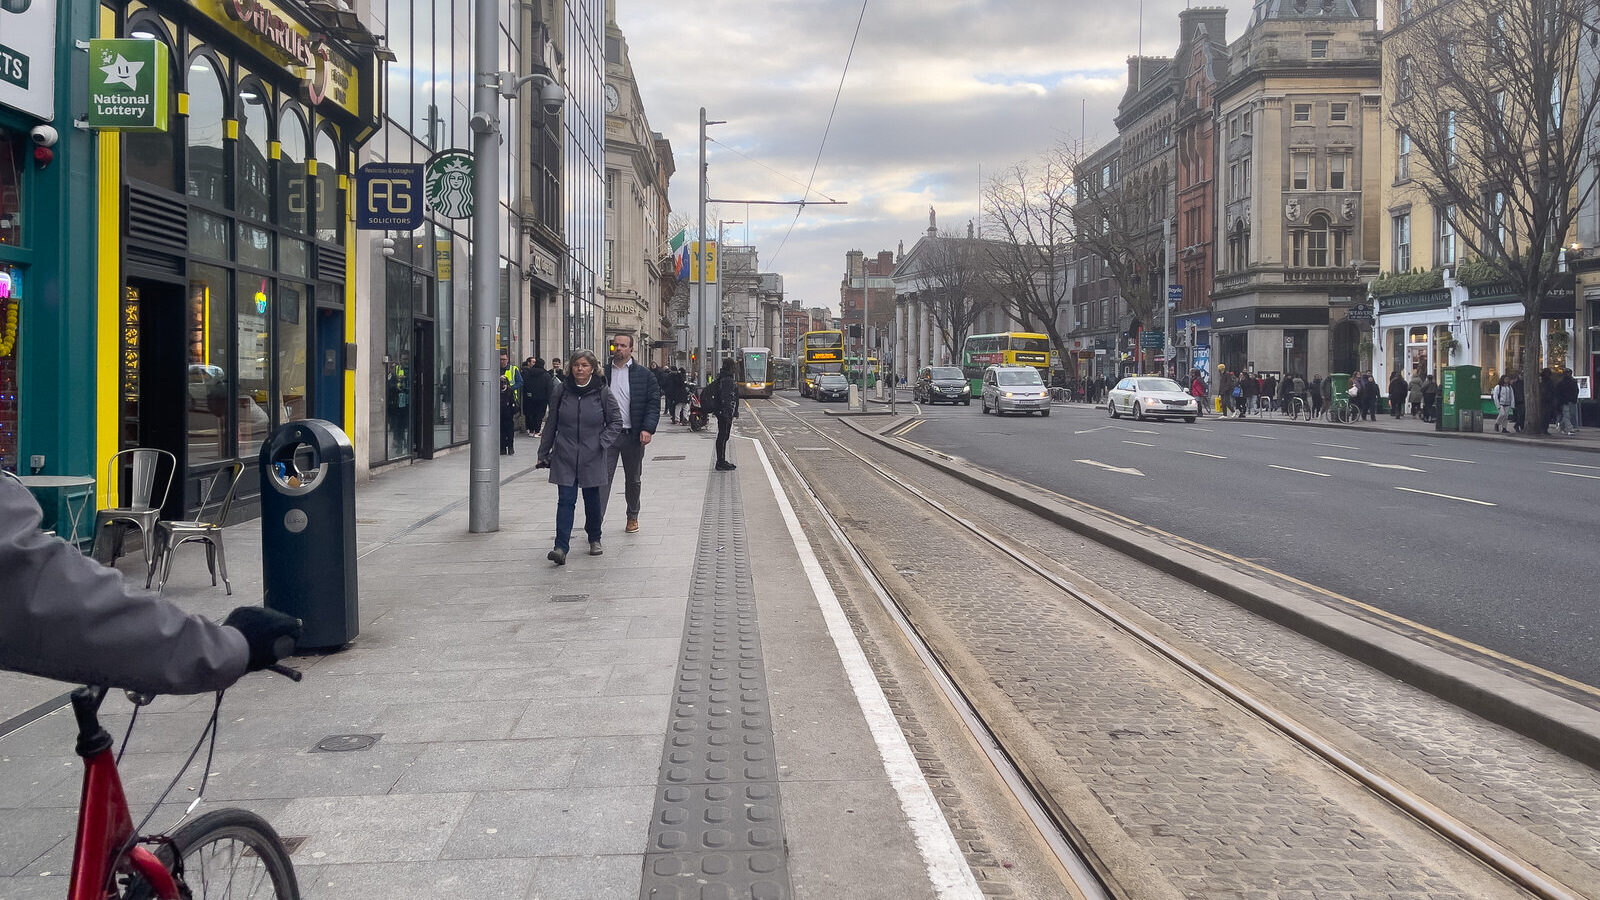 WESTMORELAND STREET IN DUBLIN [NAMED AFTER JOHN FANE THE 10th EARL OF WESTMORELAND]-229564-1